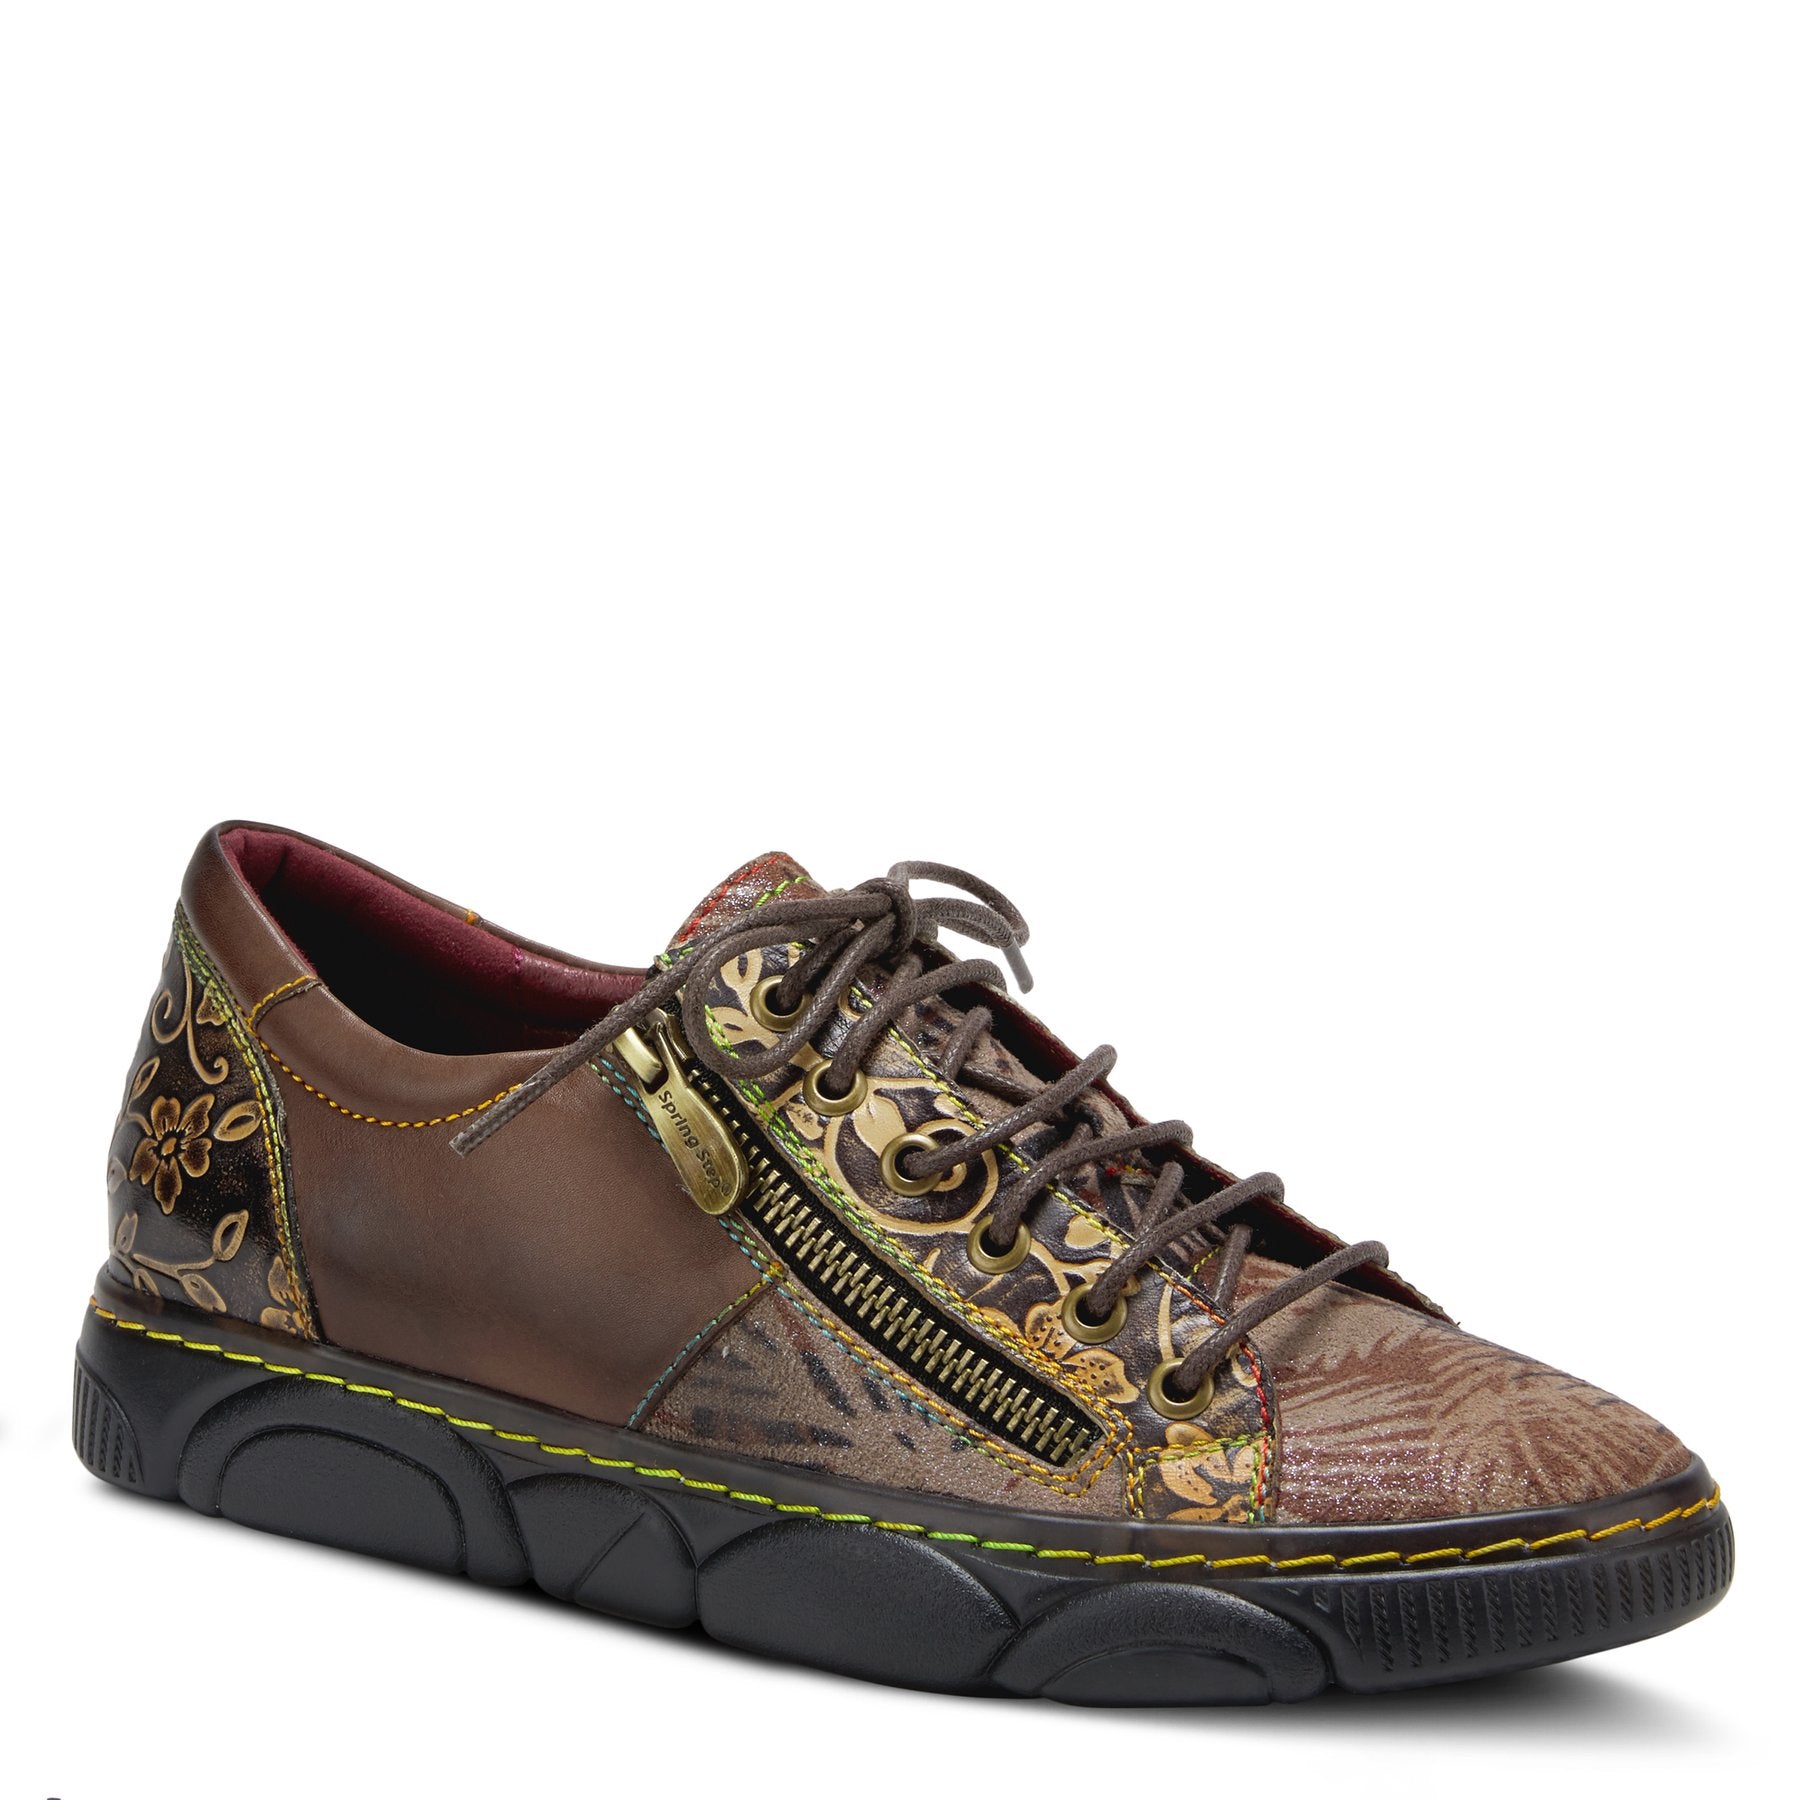 Outer side front view of the L'Artiste Danli Sneaker. This sneaker is taupe colored with a painted leather upper, a lace up front, an off front center zipper, and a black sole.